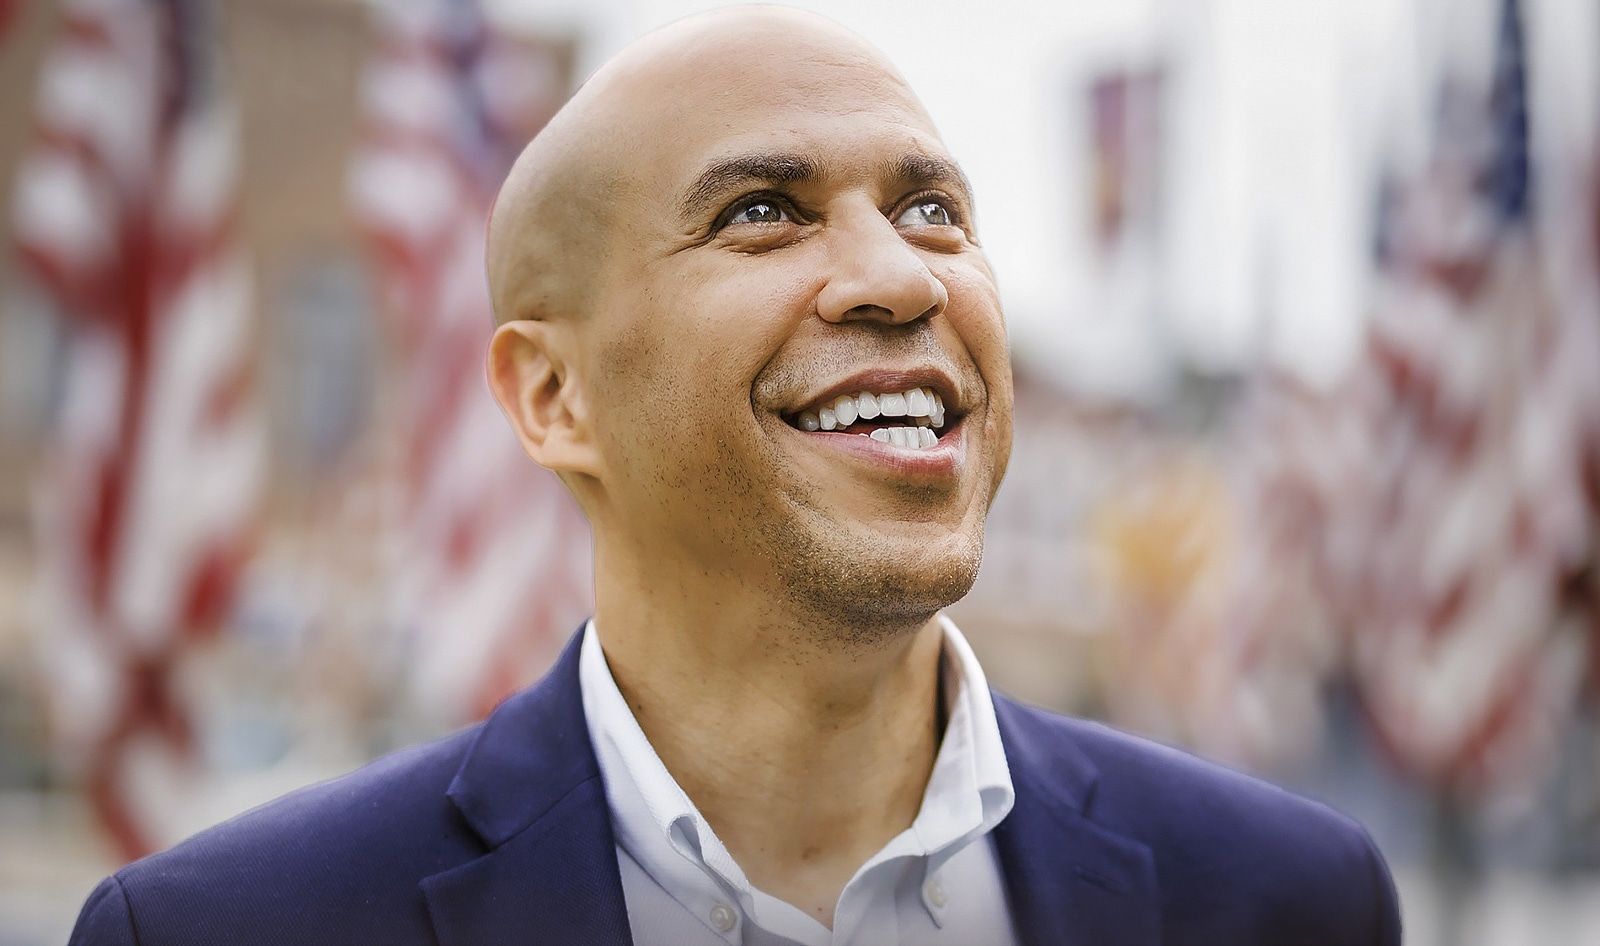 Cory Booker: Empathy Is Necessary to Change Our Food System